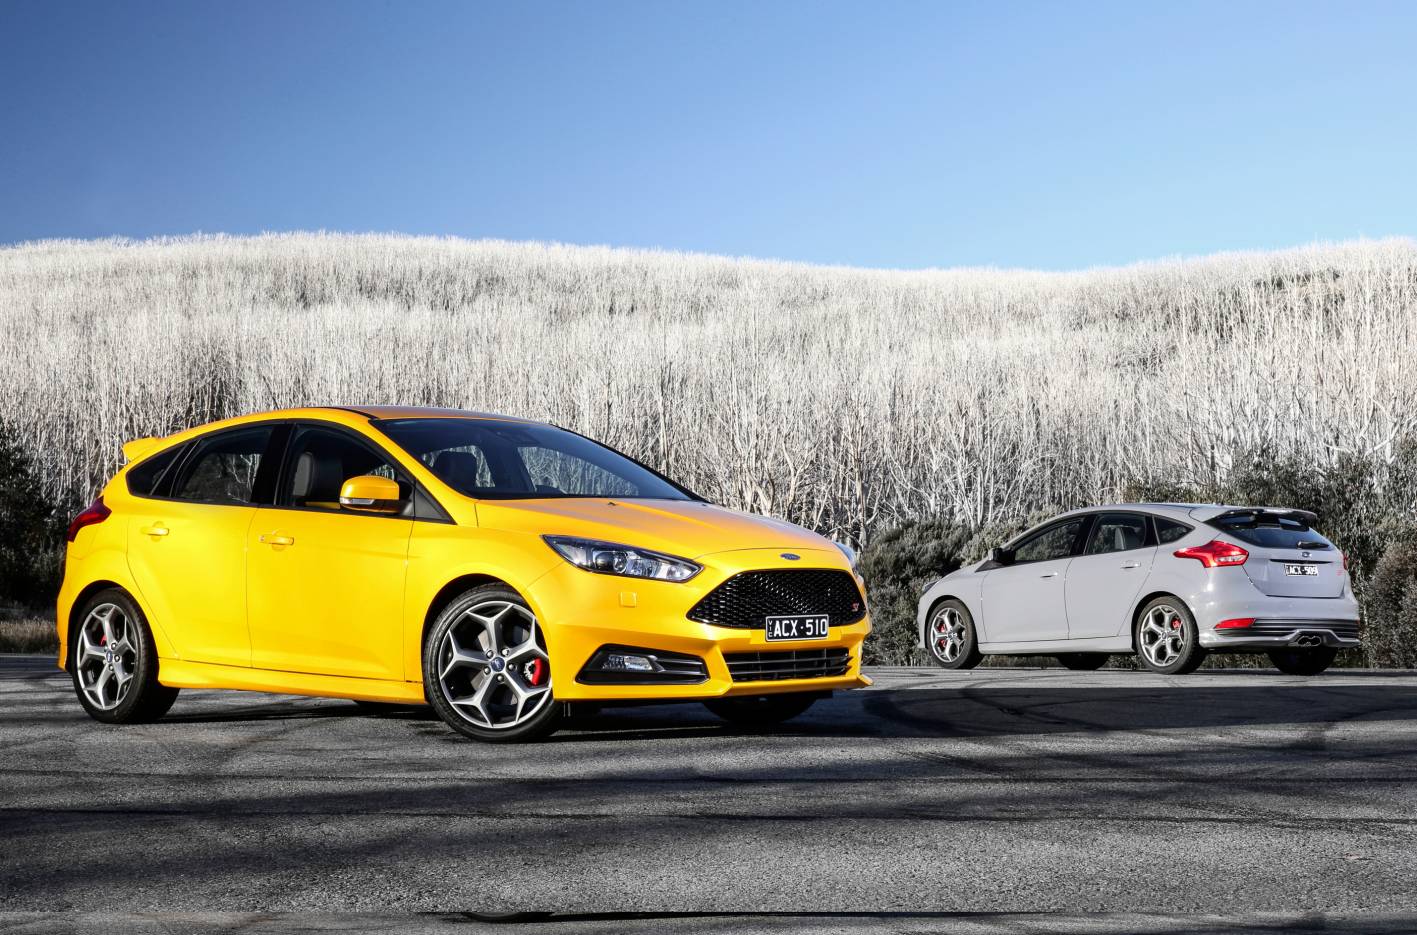 Visually The Revised Lz Focus St Features Sportier And More Athletic